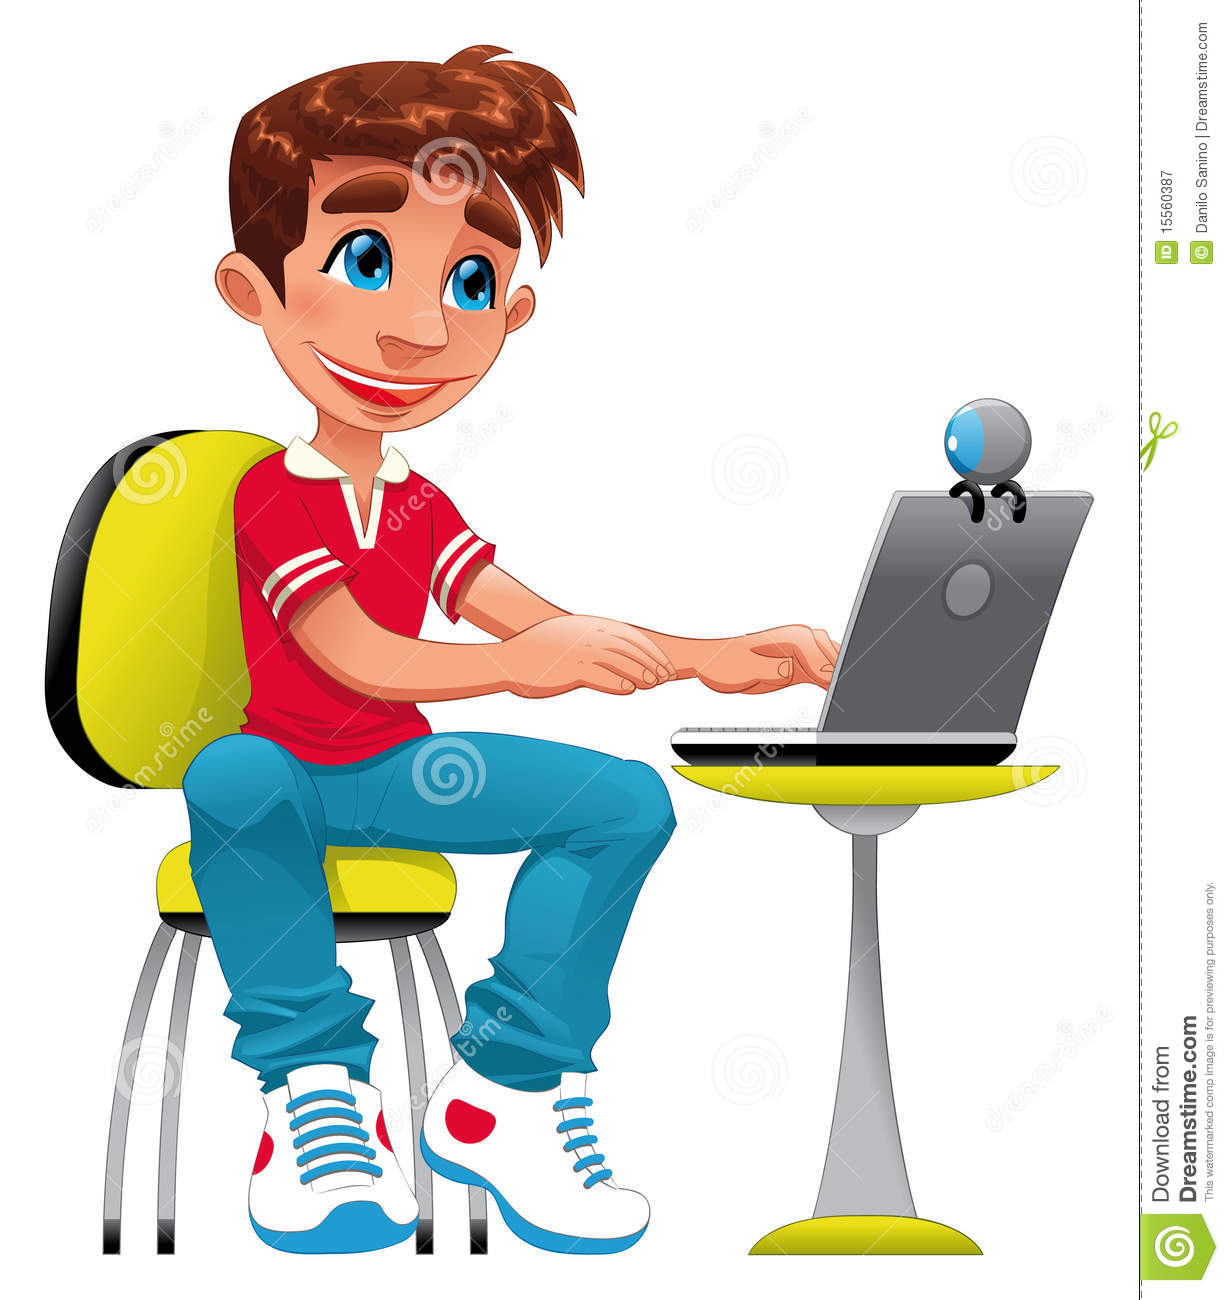 Boy And Computer  Royalty Free Stock Photography   Image  15560387